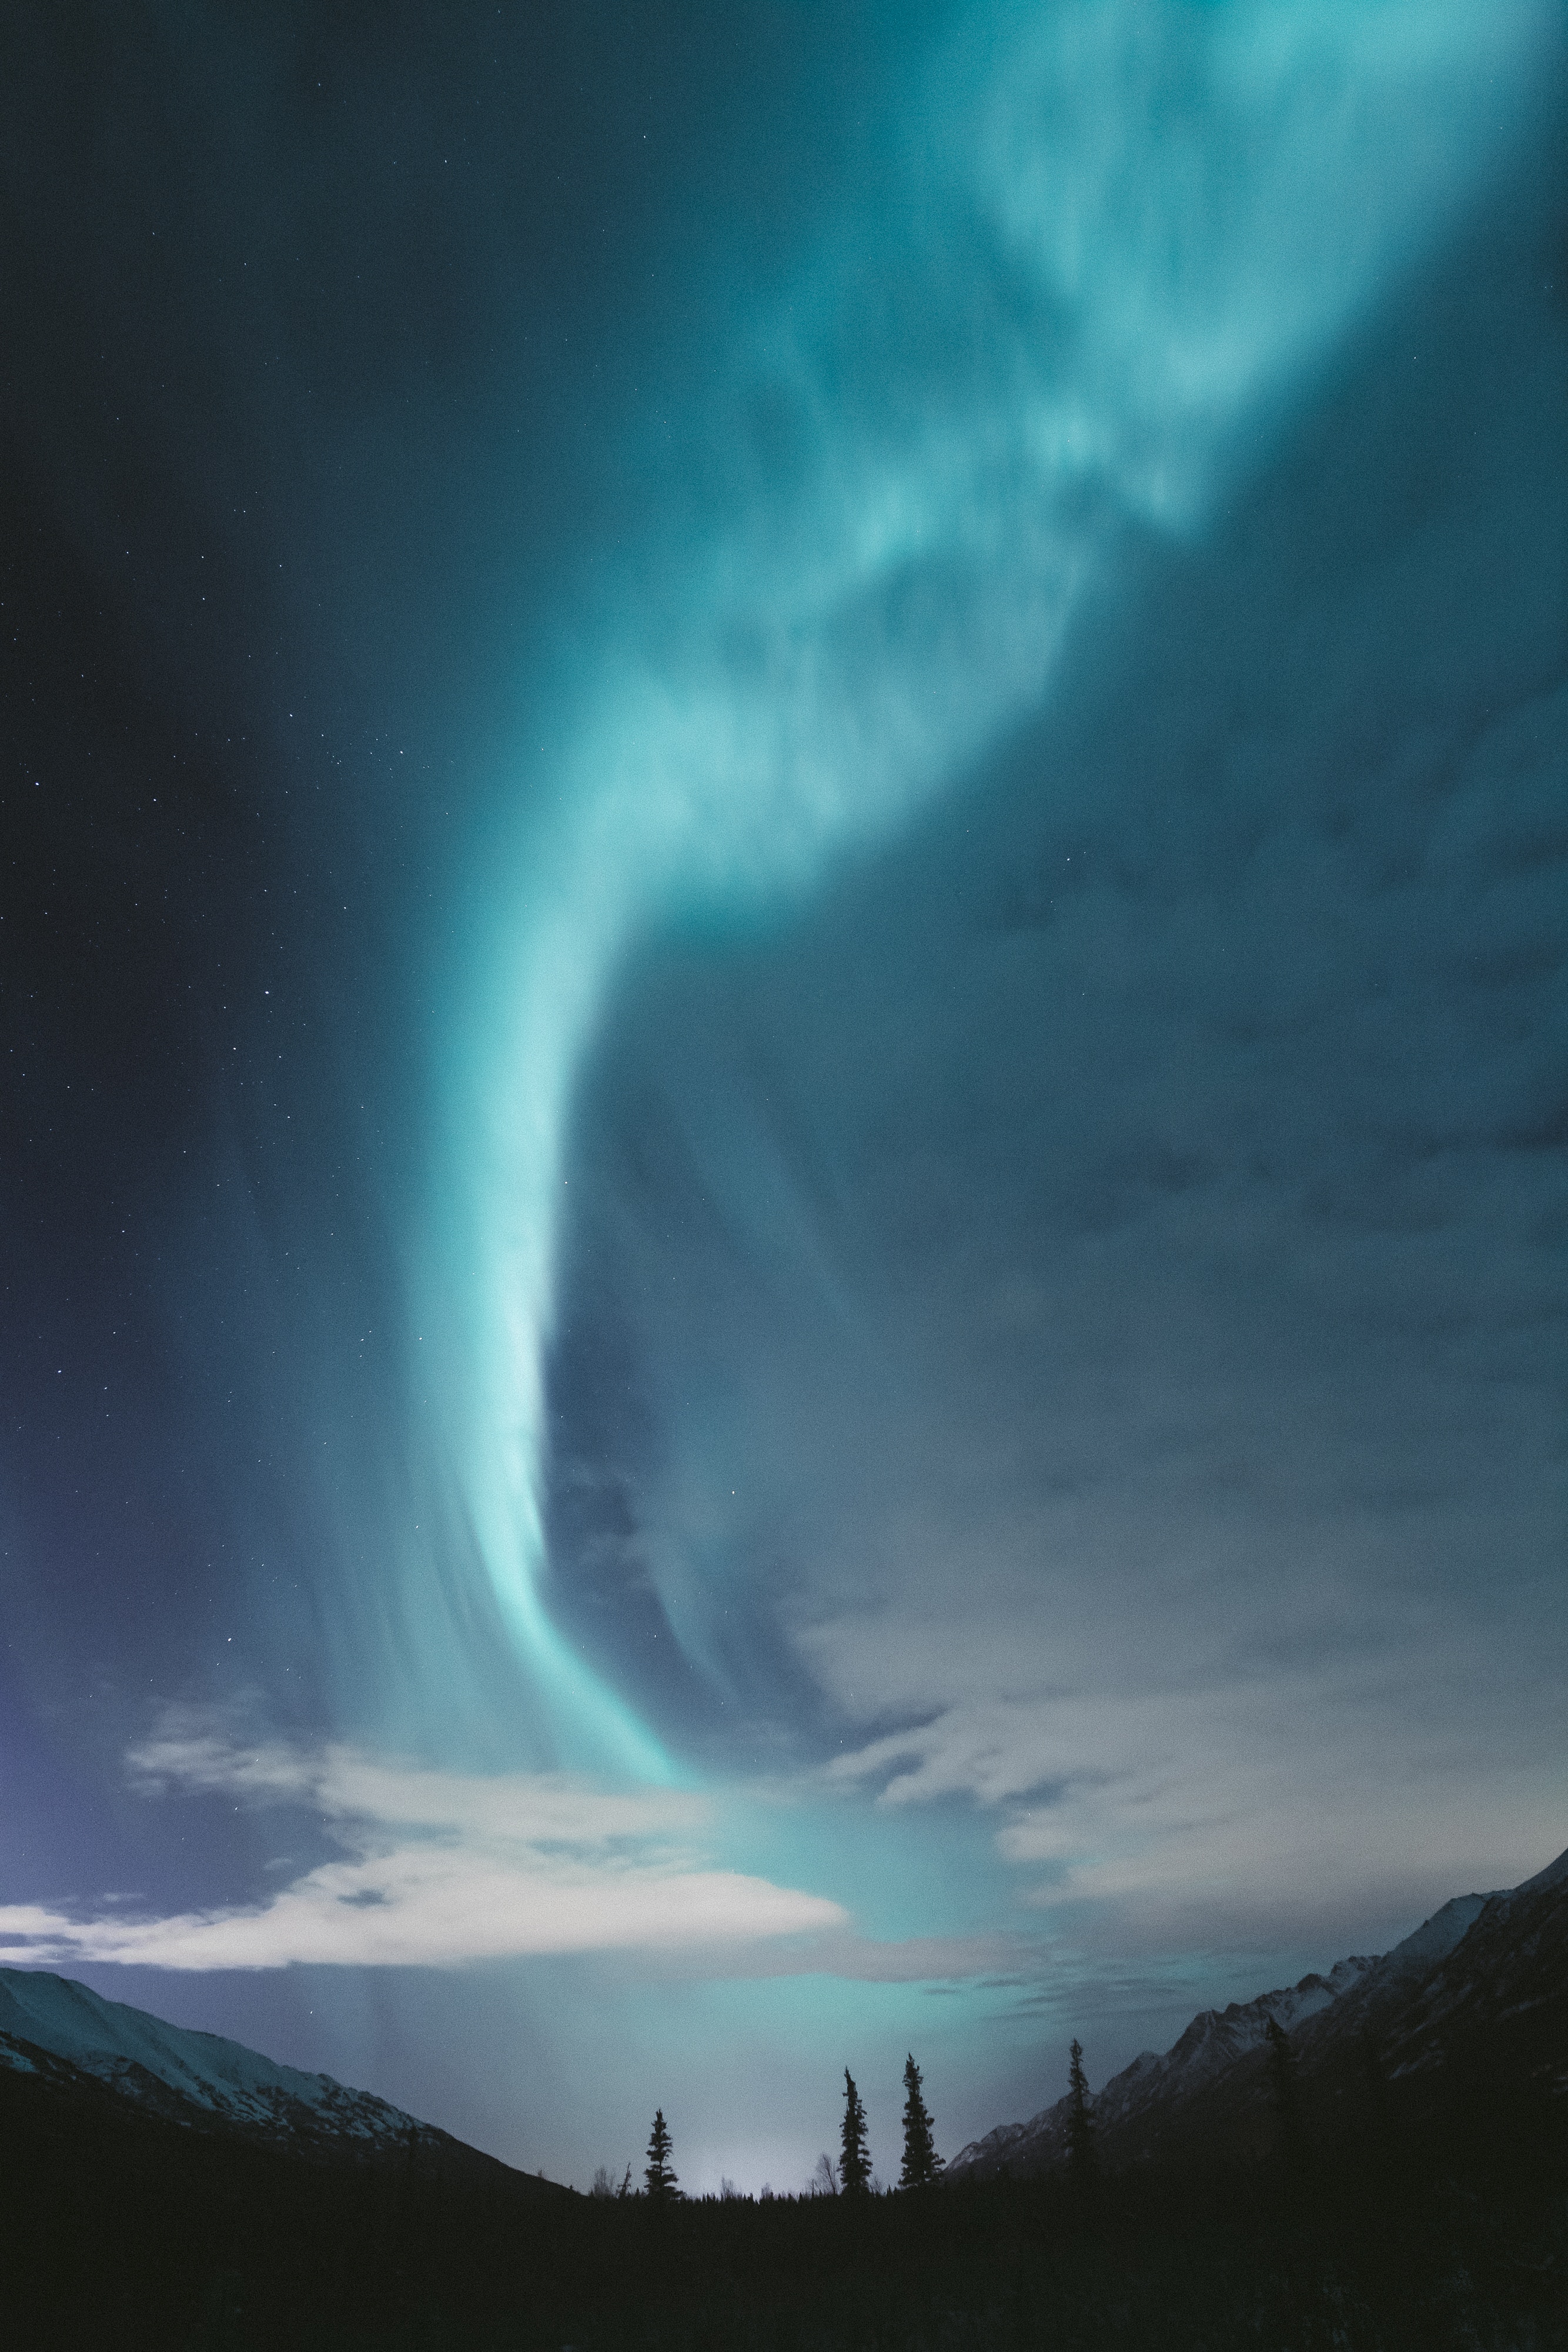 147507 download wallpaper northern lights, stars, nature, sky, usa, united states, aurora borealis, anchorage screensavers and pictures for free